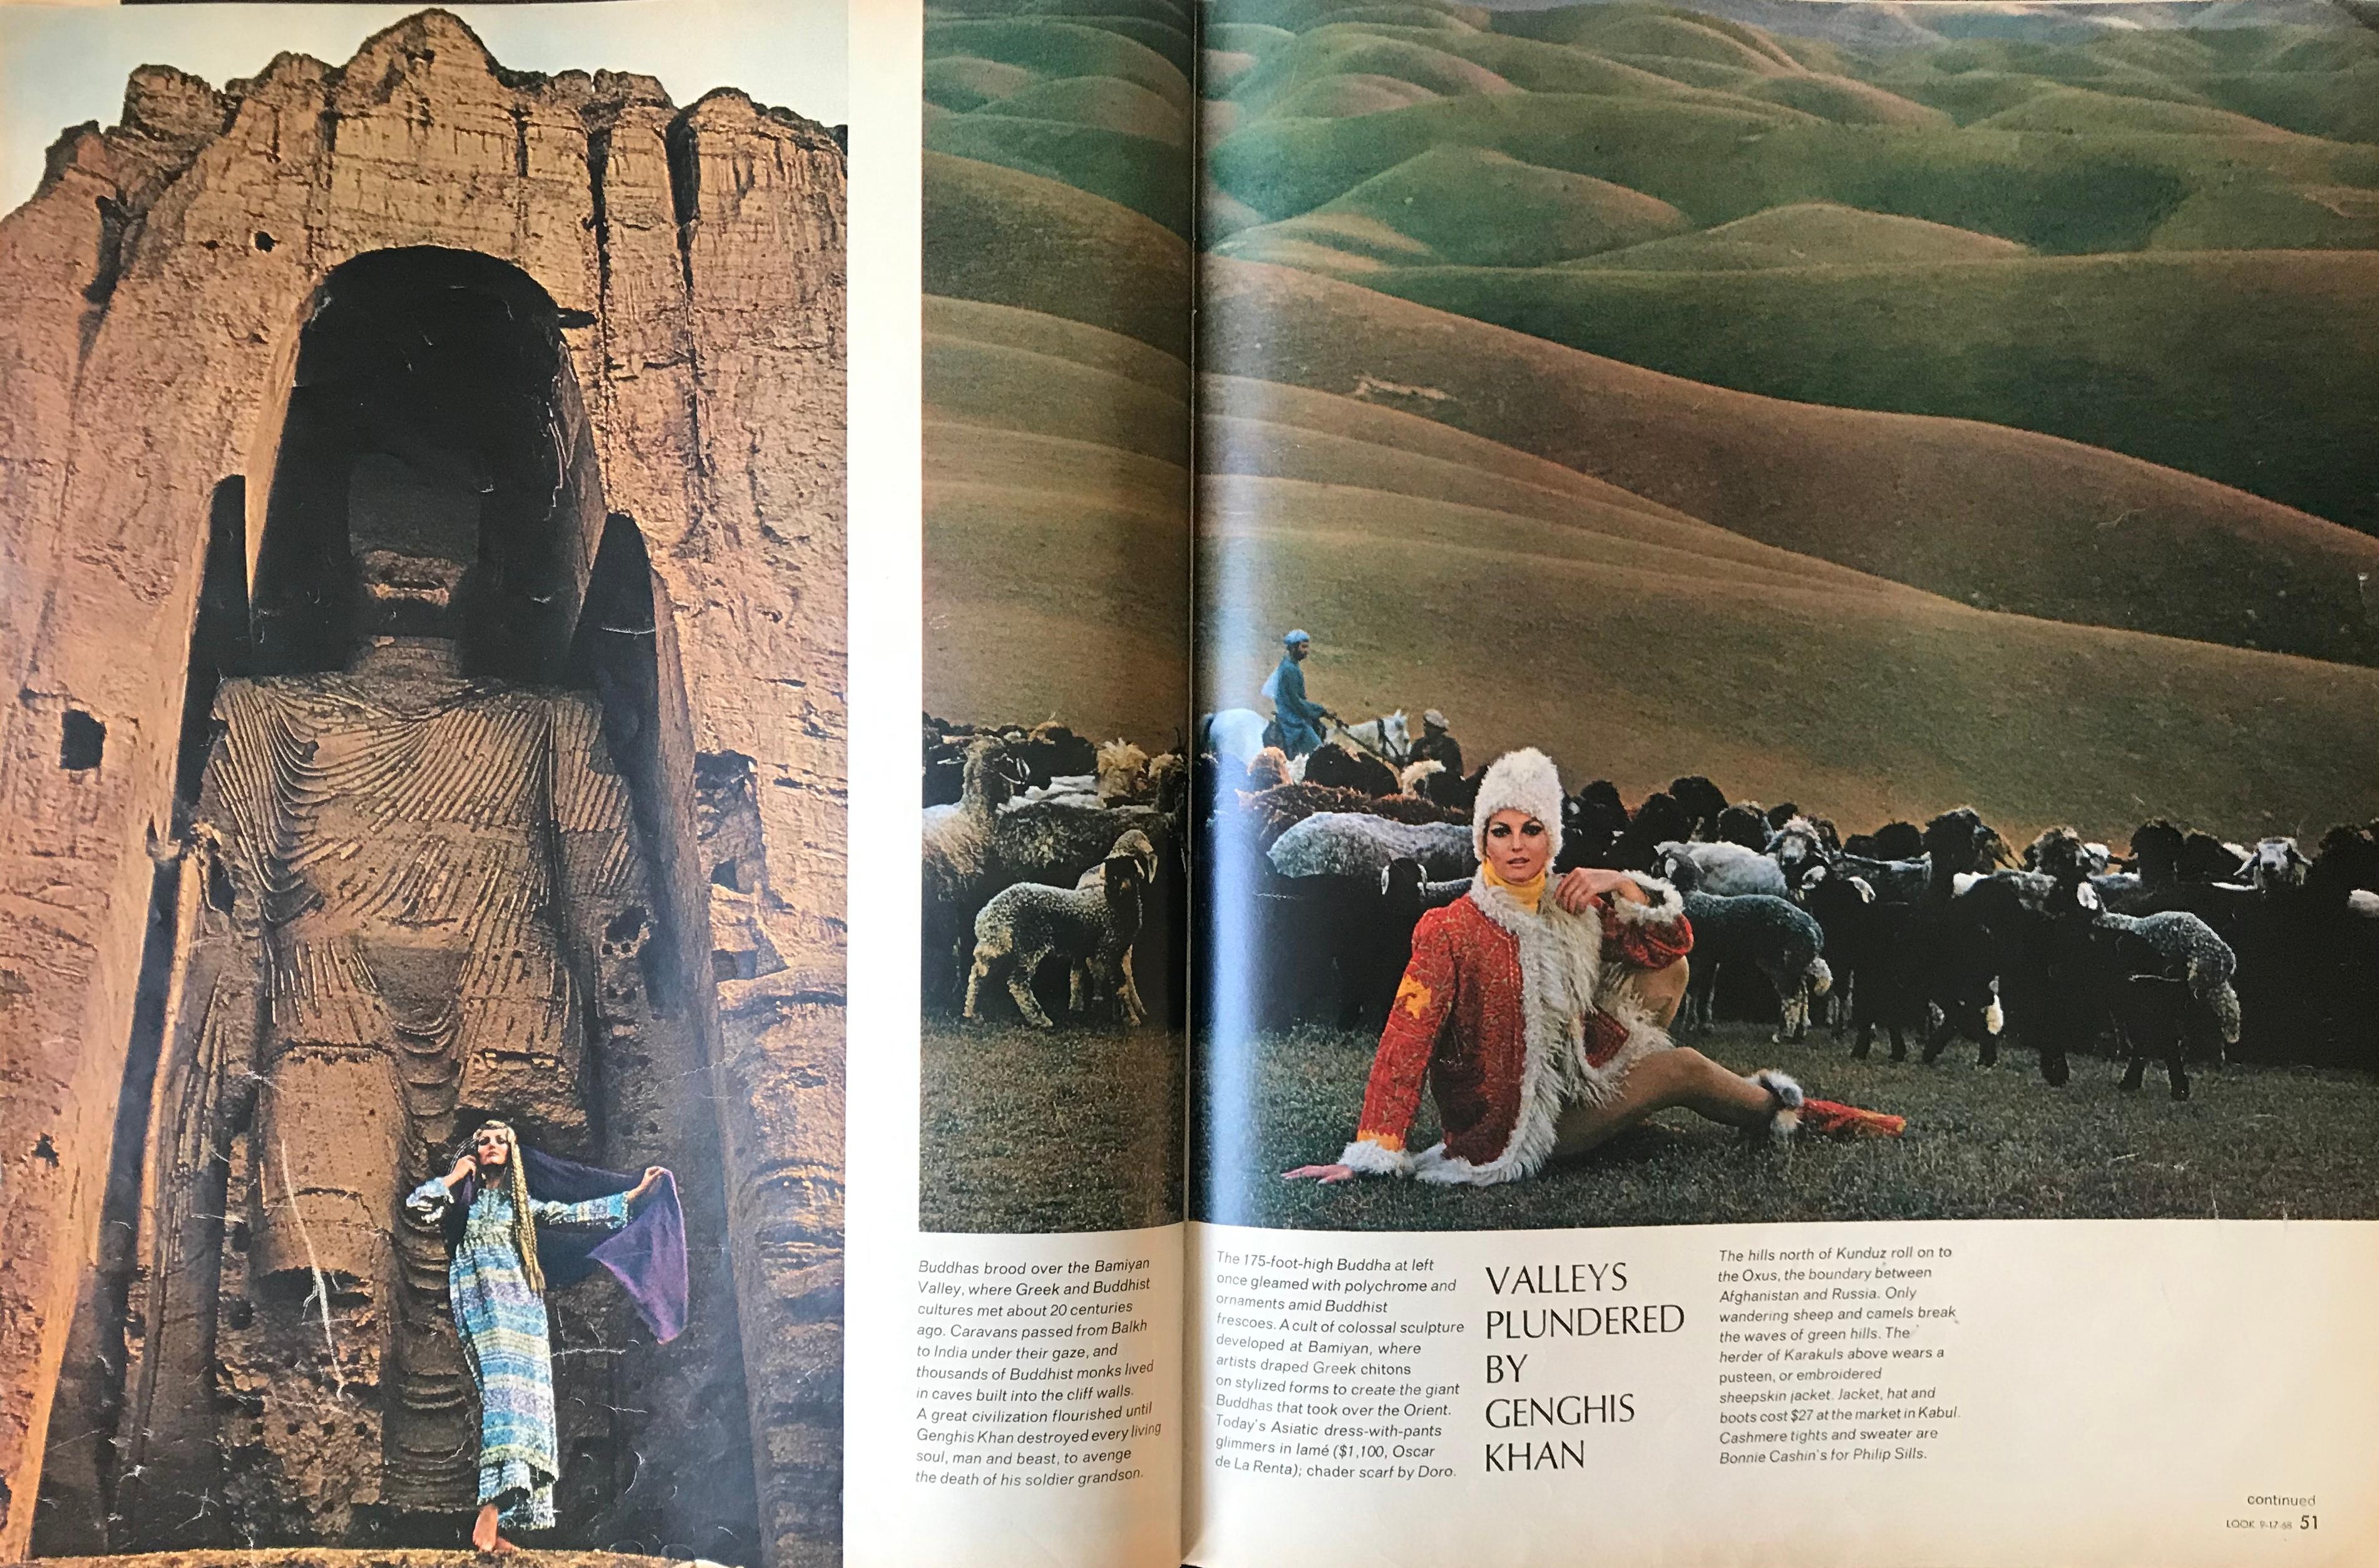 Fashion Photography / Editorial photoshoot for LOOK Magazine 1968 Afghanistan Feature. Limited archival edition print of 100.   

About Fred Maroon  
Born in New Brunswick, New Jersey, Fred J. Maroon was a photographer of international renown. His